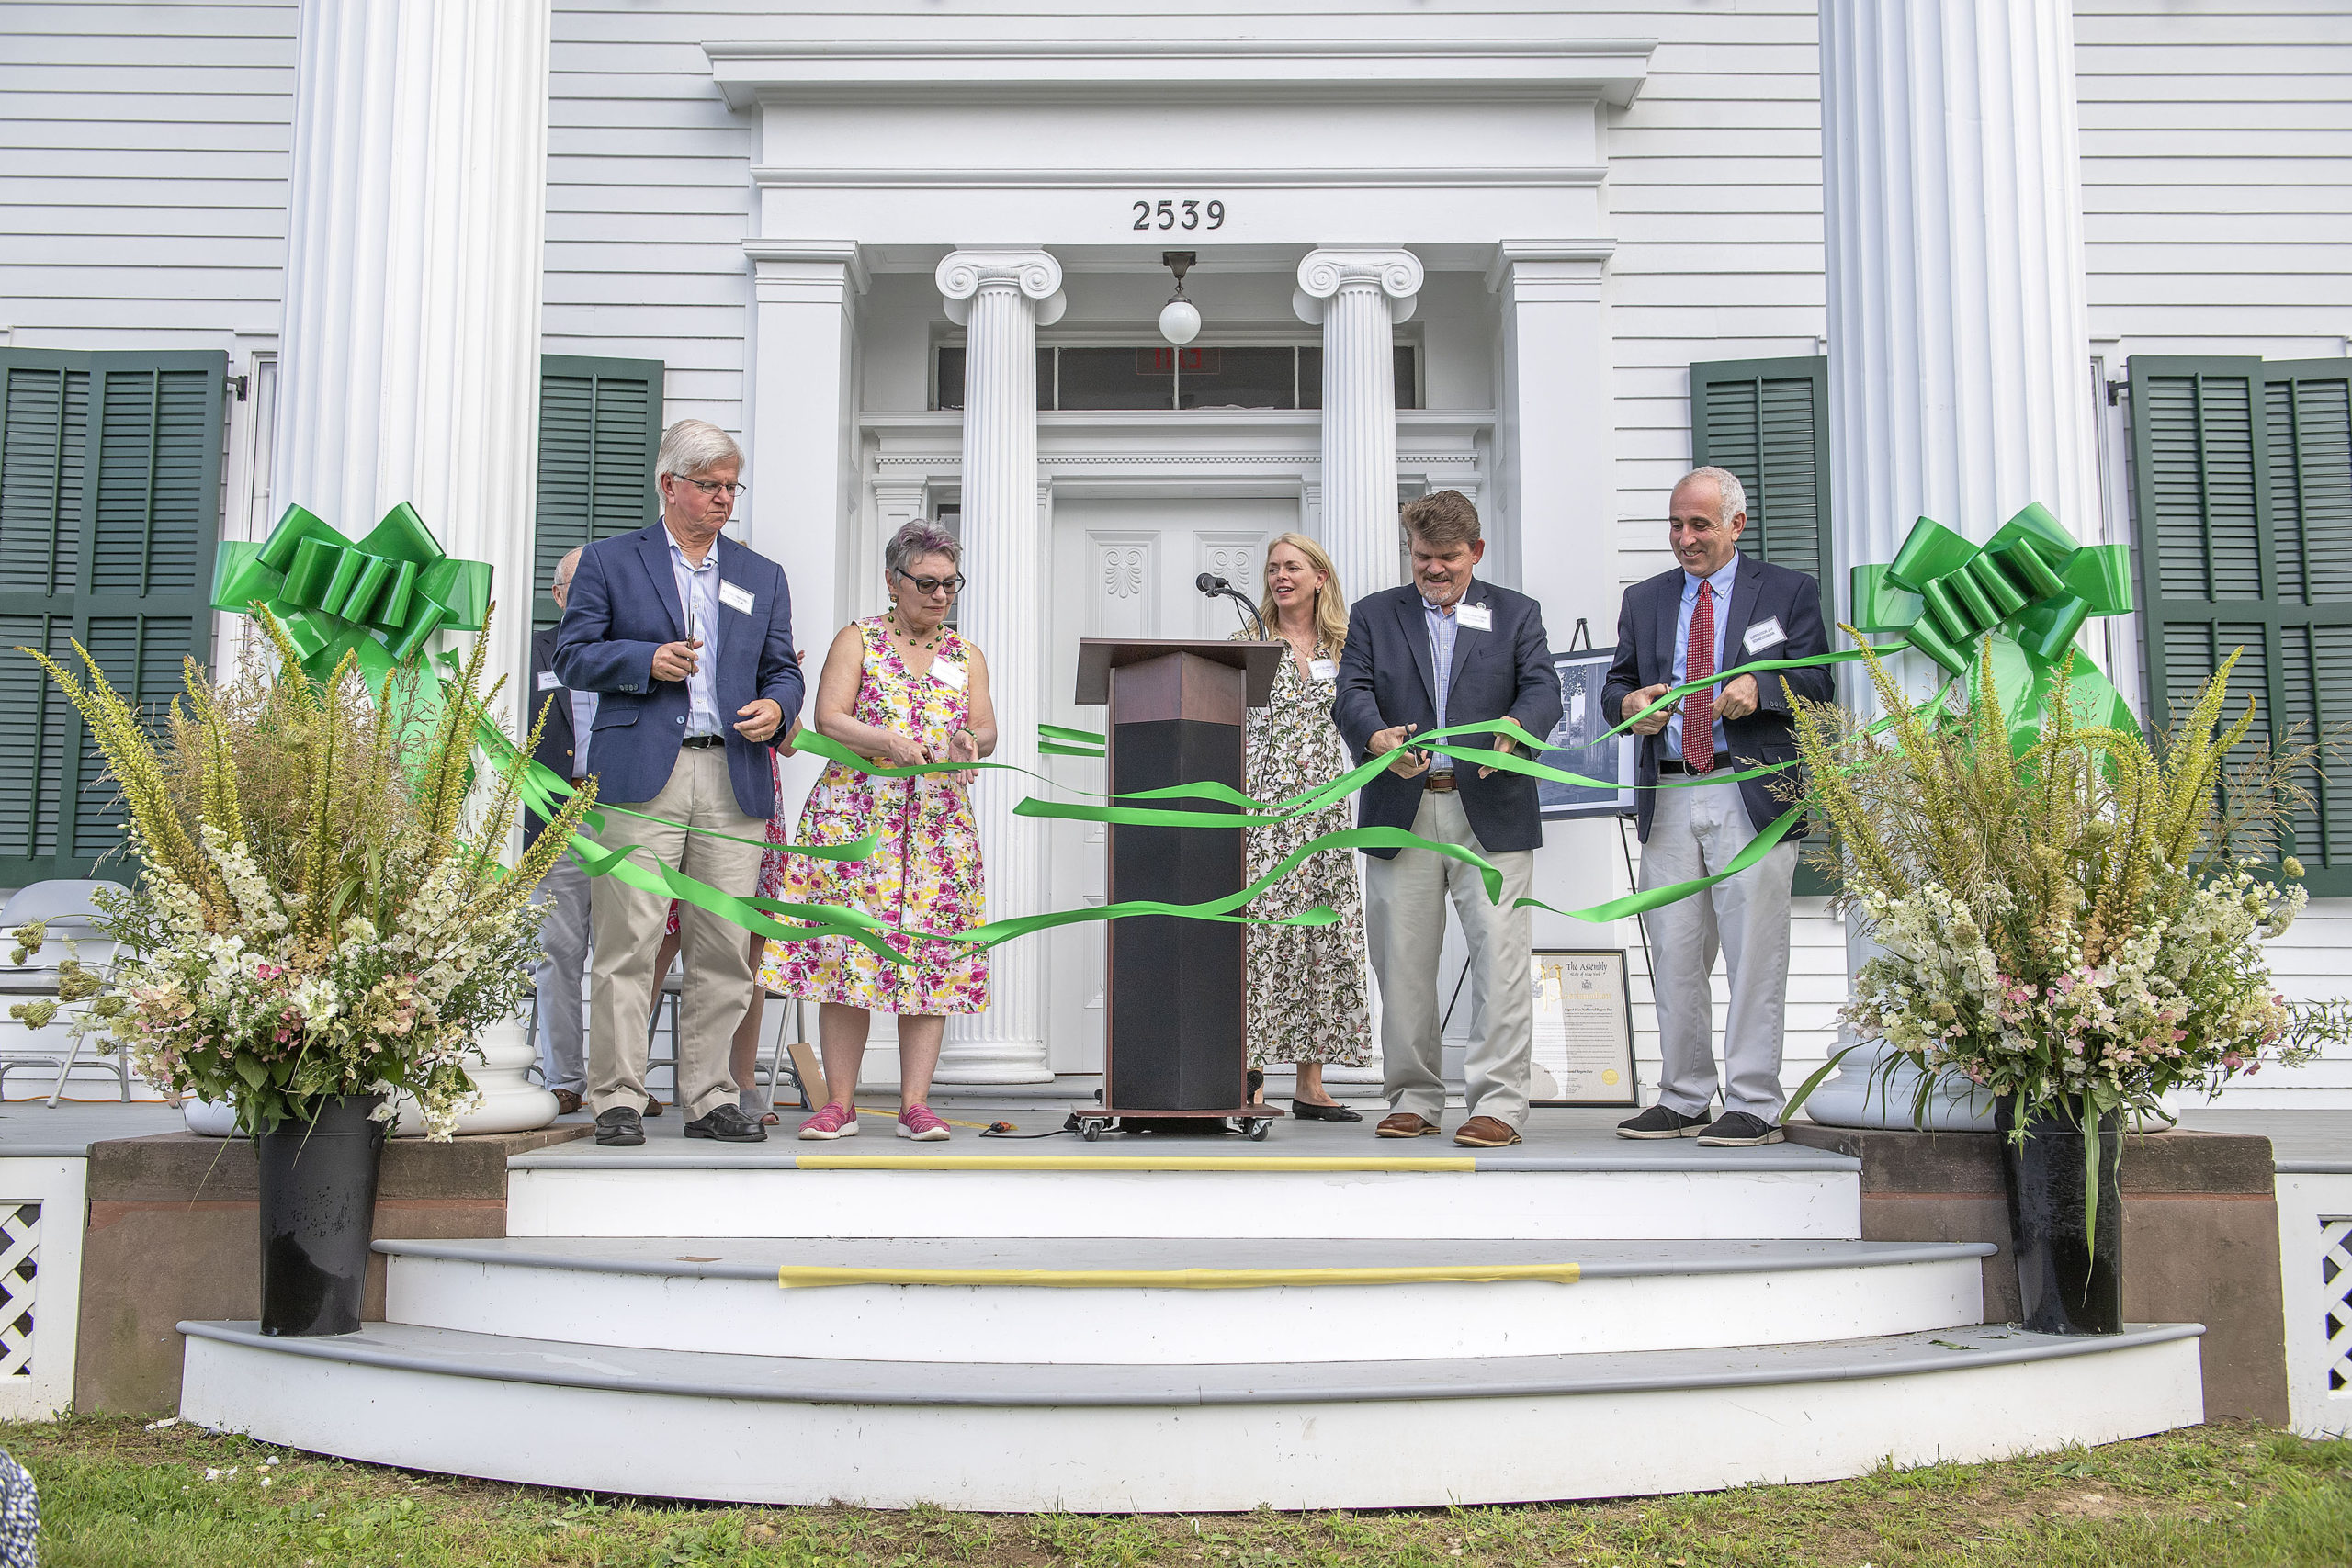 New York State Assemblyman Fred Thiele, Community Preservation Fund Manager Lisa Kombrink, Southampton Town Board Board Member Tommy John Schiavoni and Southampton Town Supervisor Jay Schneiderman cut the ribbon(s) during a ceremony that was held to inaugurate the new, completely refurbished Nathaniel Rogers House at the corner of Ocean Road and Montauk Highway on Sunday.   MICHAEL HELLER